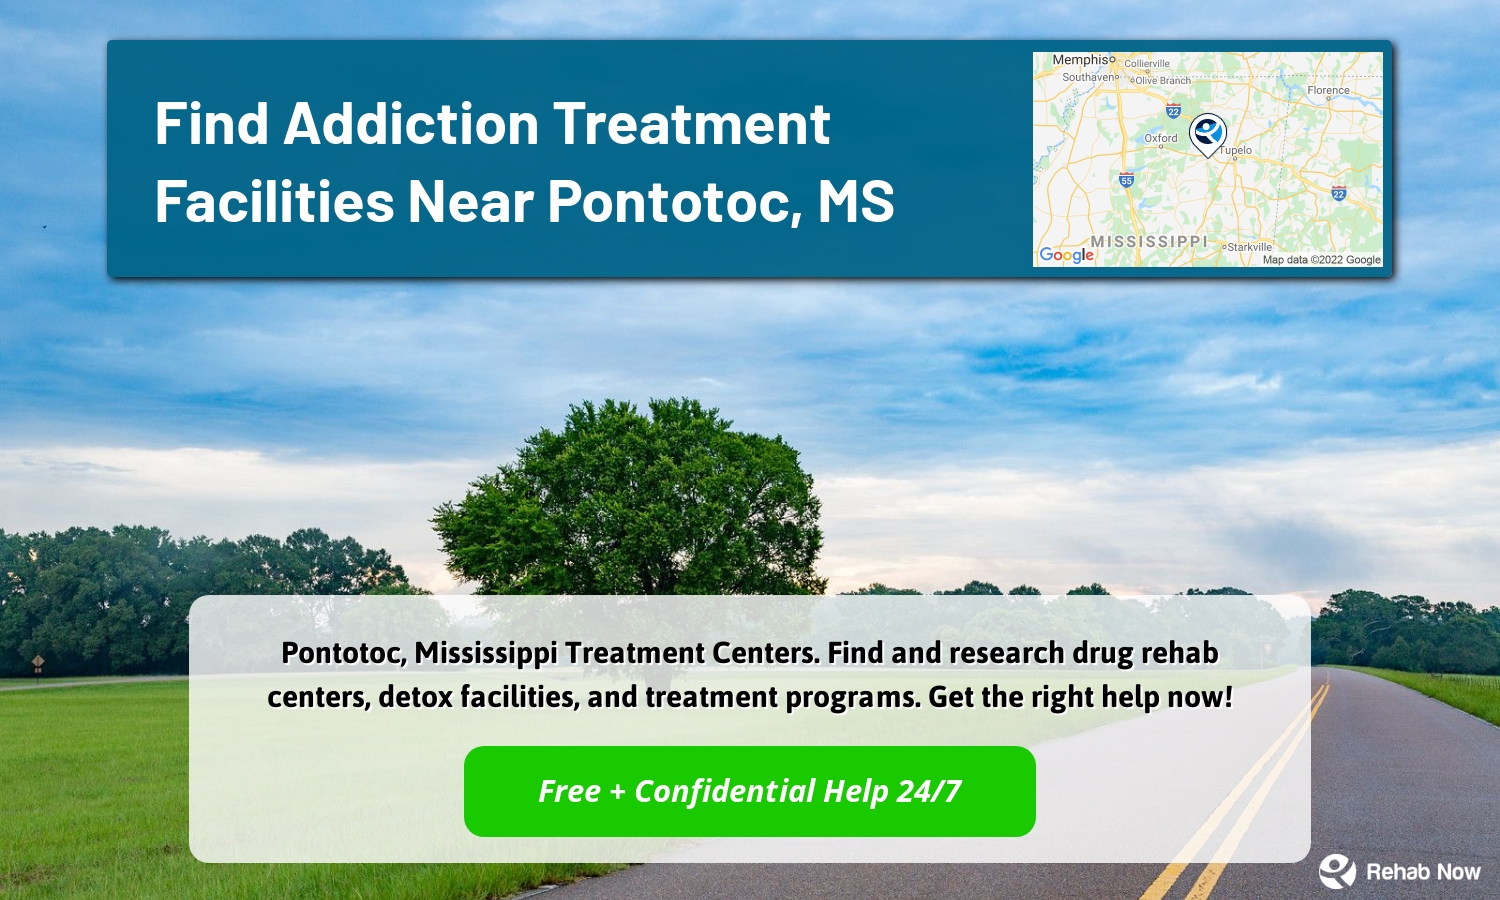 Pontotoc, Mississippi Treatment Centers. Find and research drug rehab centers, detox facilities, and treatment programs. Get the right help now!